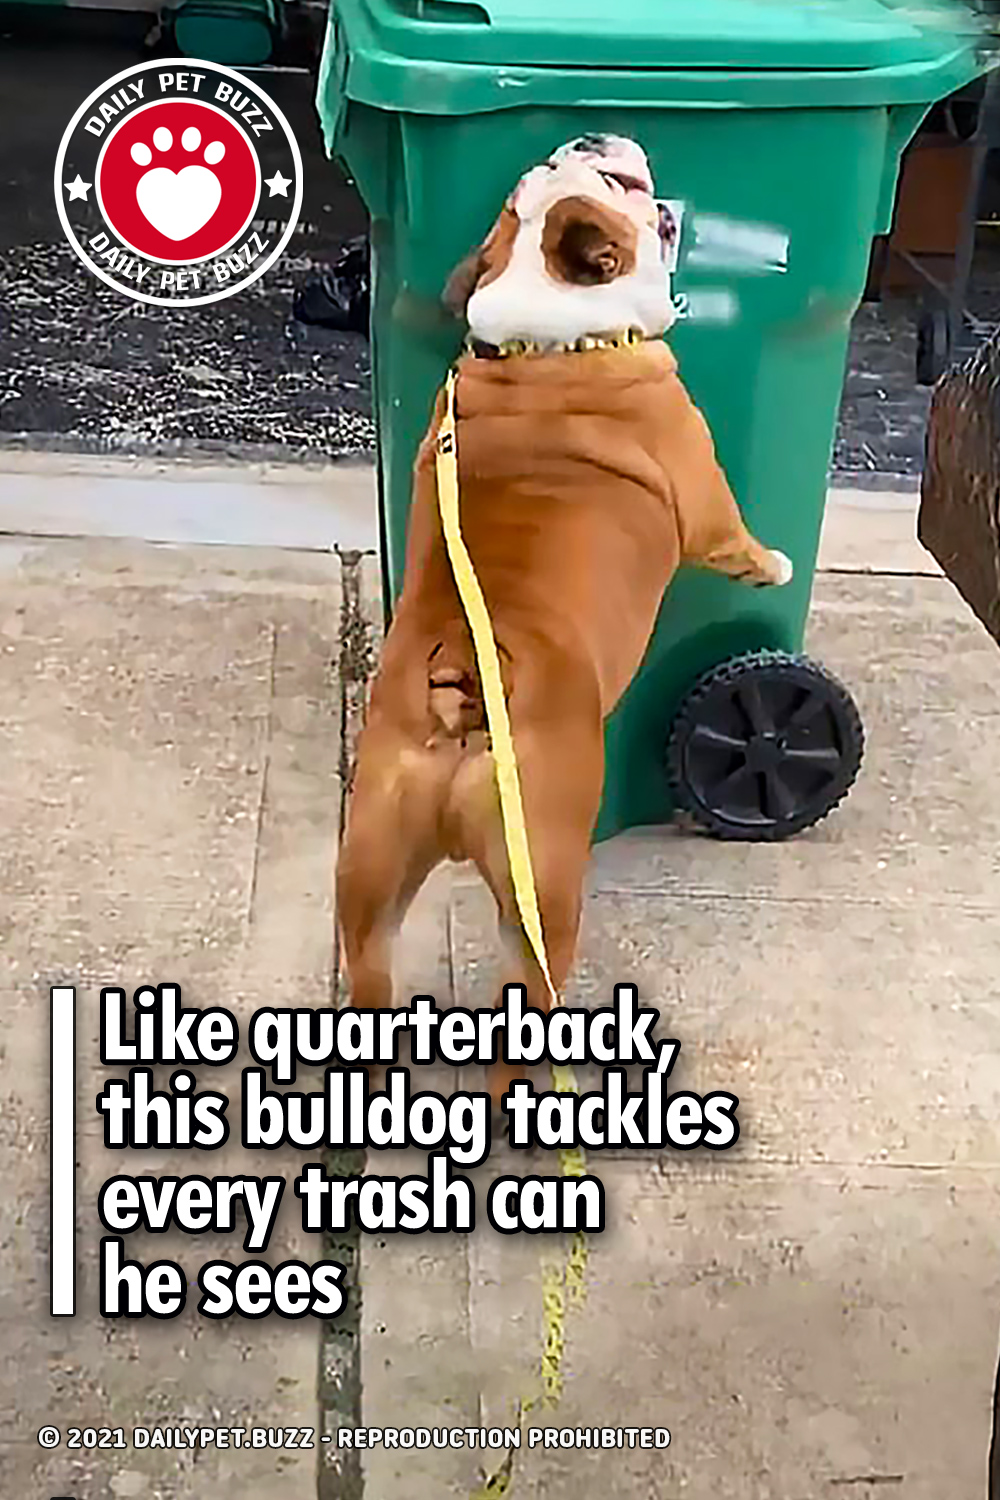 Like quarterback, this bulldog tackles every trash can he sees